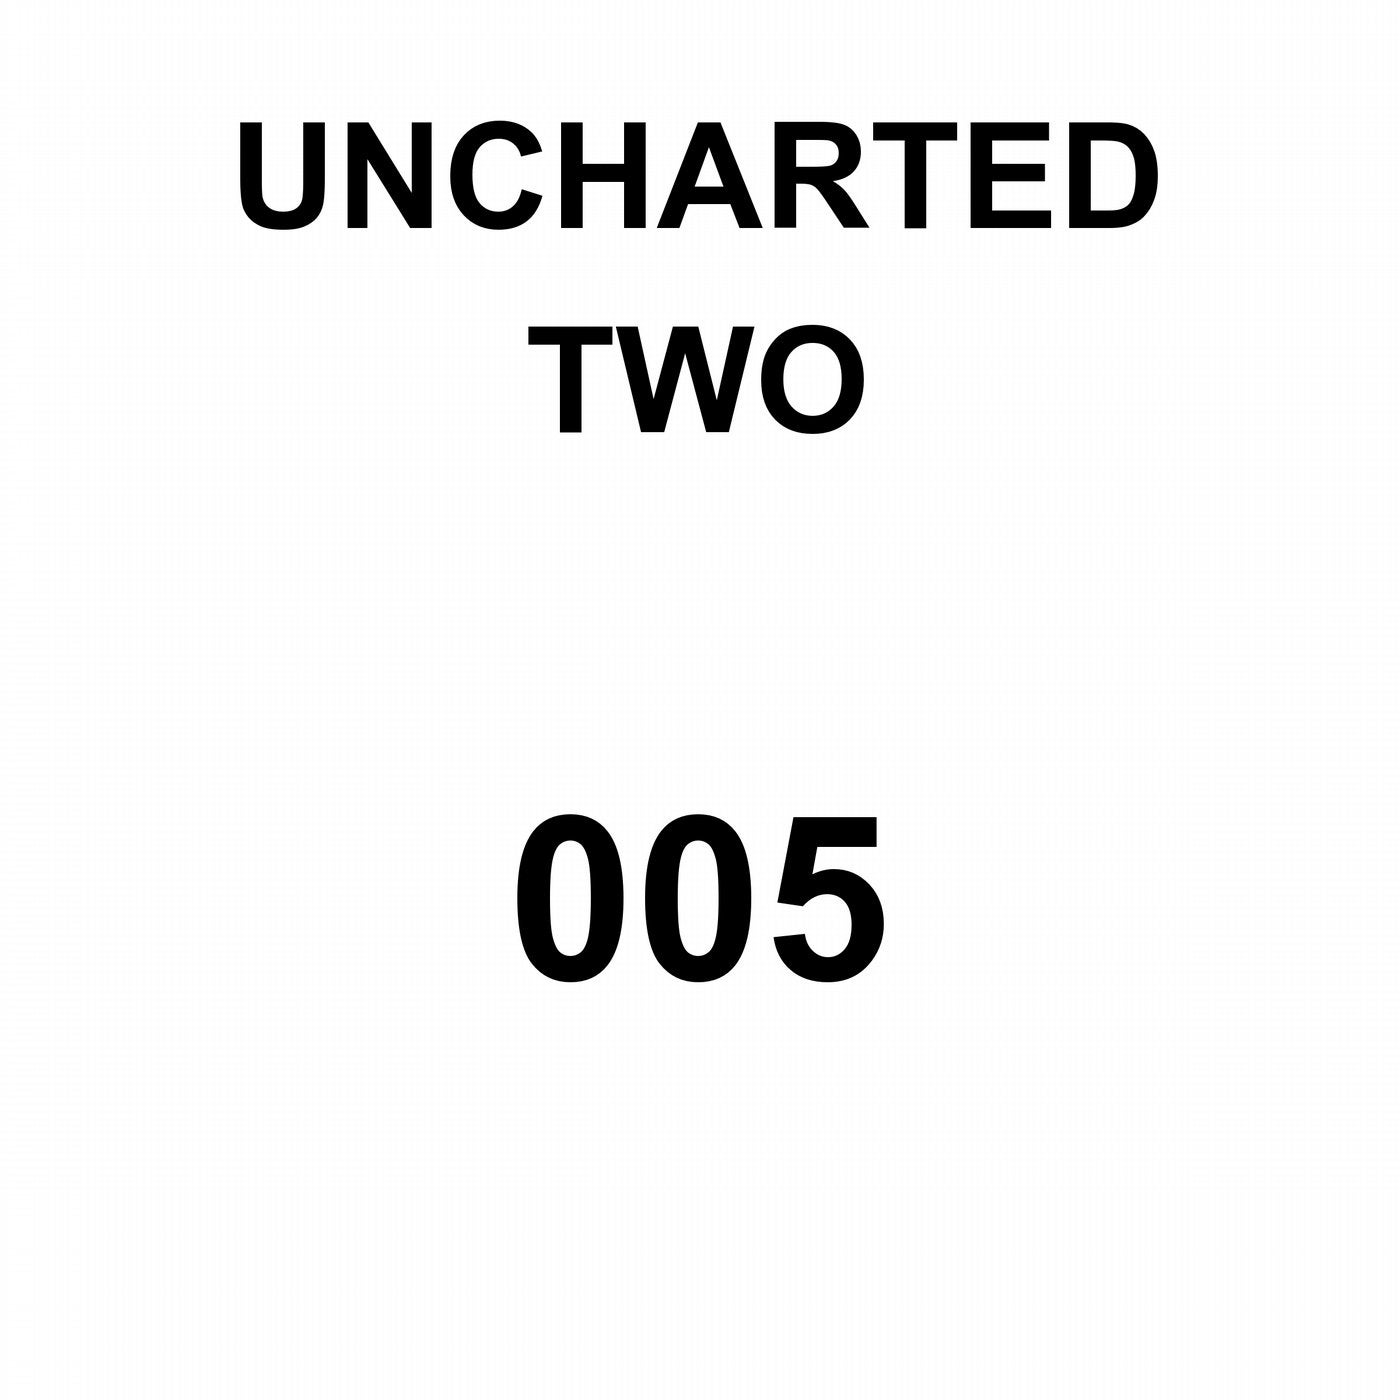 Uncharted Two